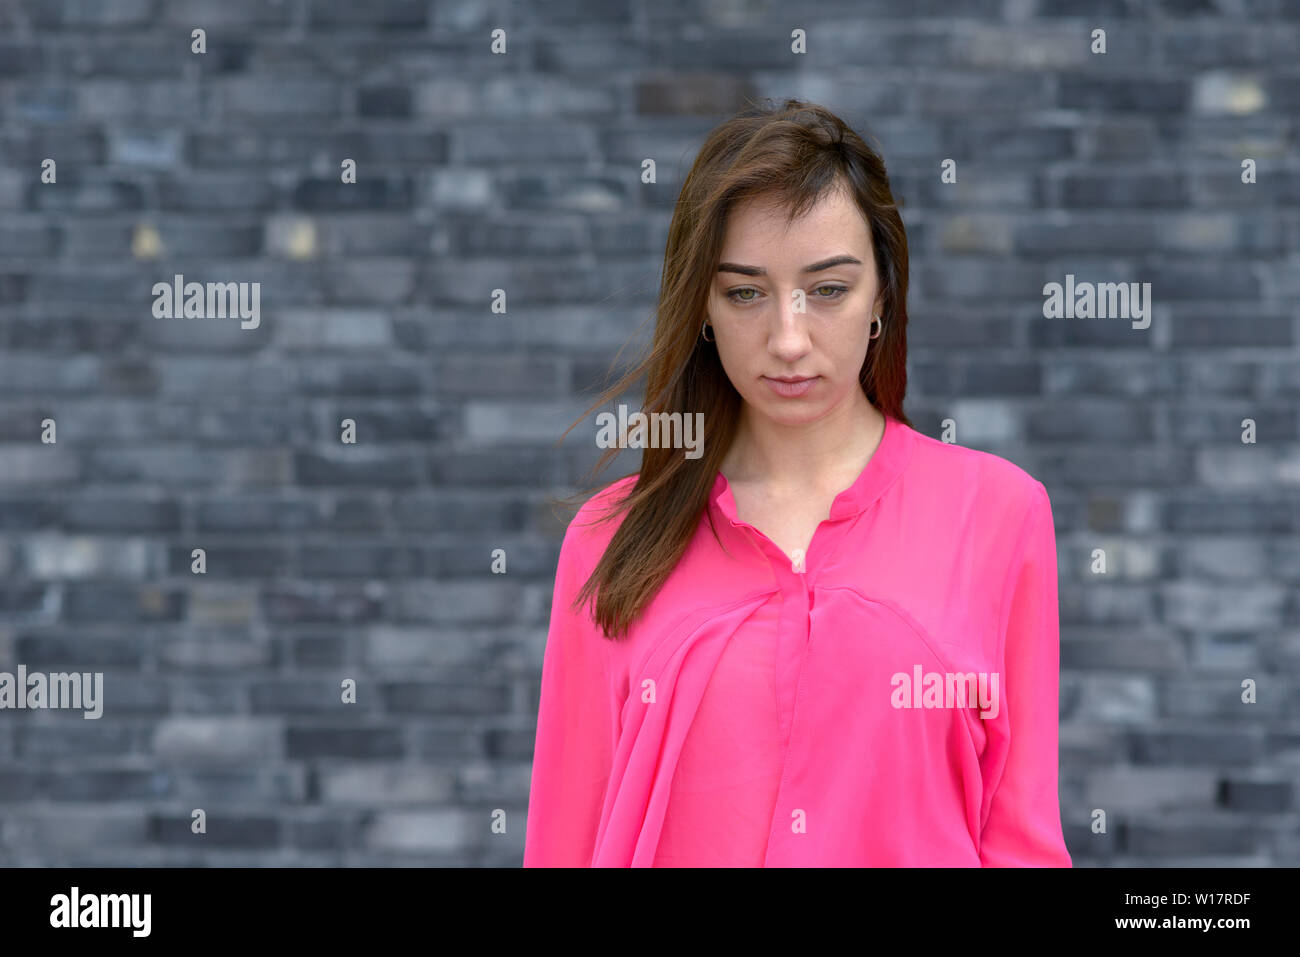 Thoughtful young woman with downcast eyes and a serious expression posing in a bright pink top in front of a grey brick wall Stock Photo